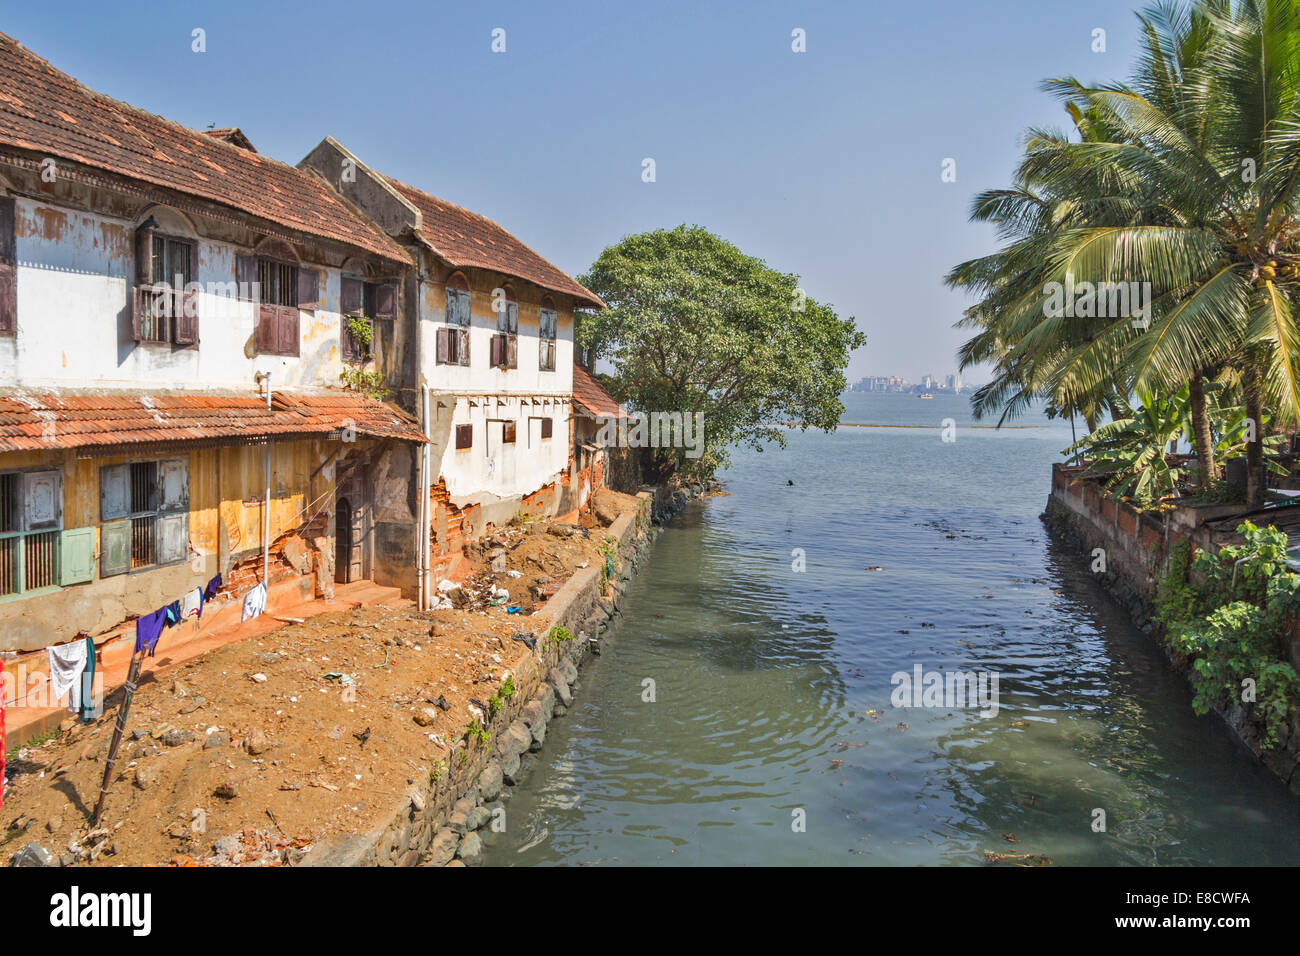 OLD HOUSES OF PORT KOCHI OR COCHIN INDIA LINING THE PUTRID POLLUTED SEWAGE CANALS WHICH DRAIN INTO THE SEA Stock Photo